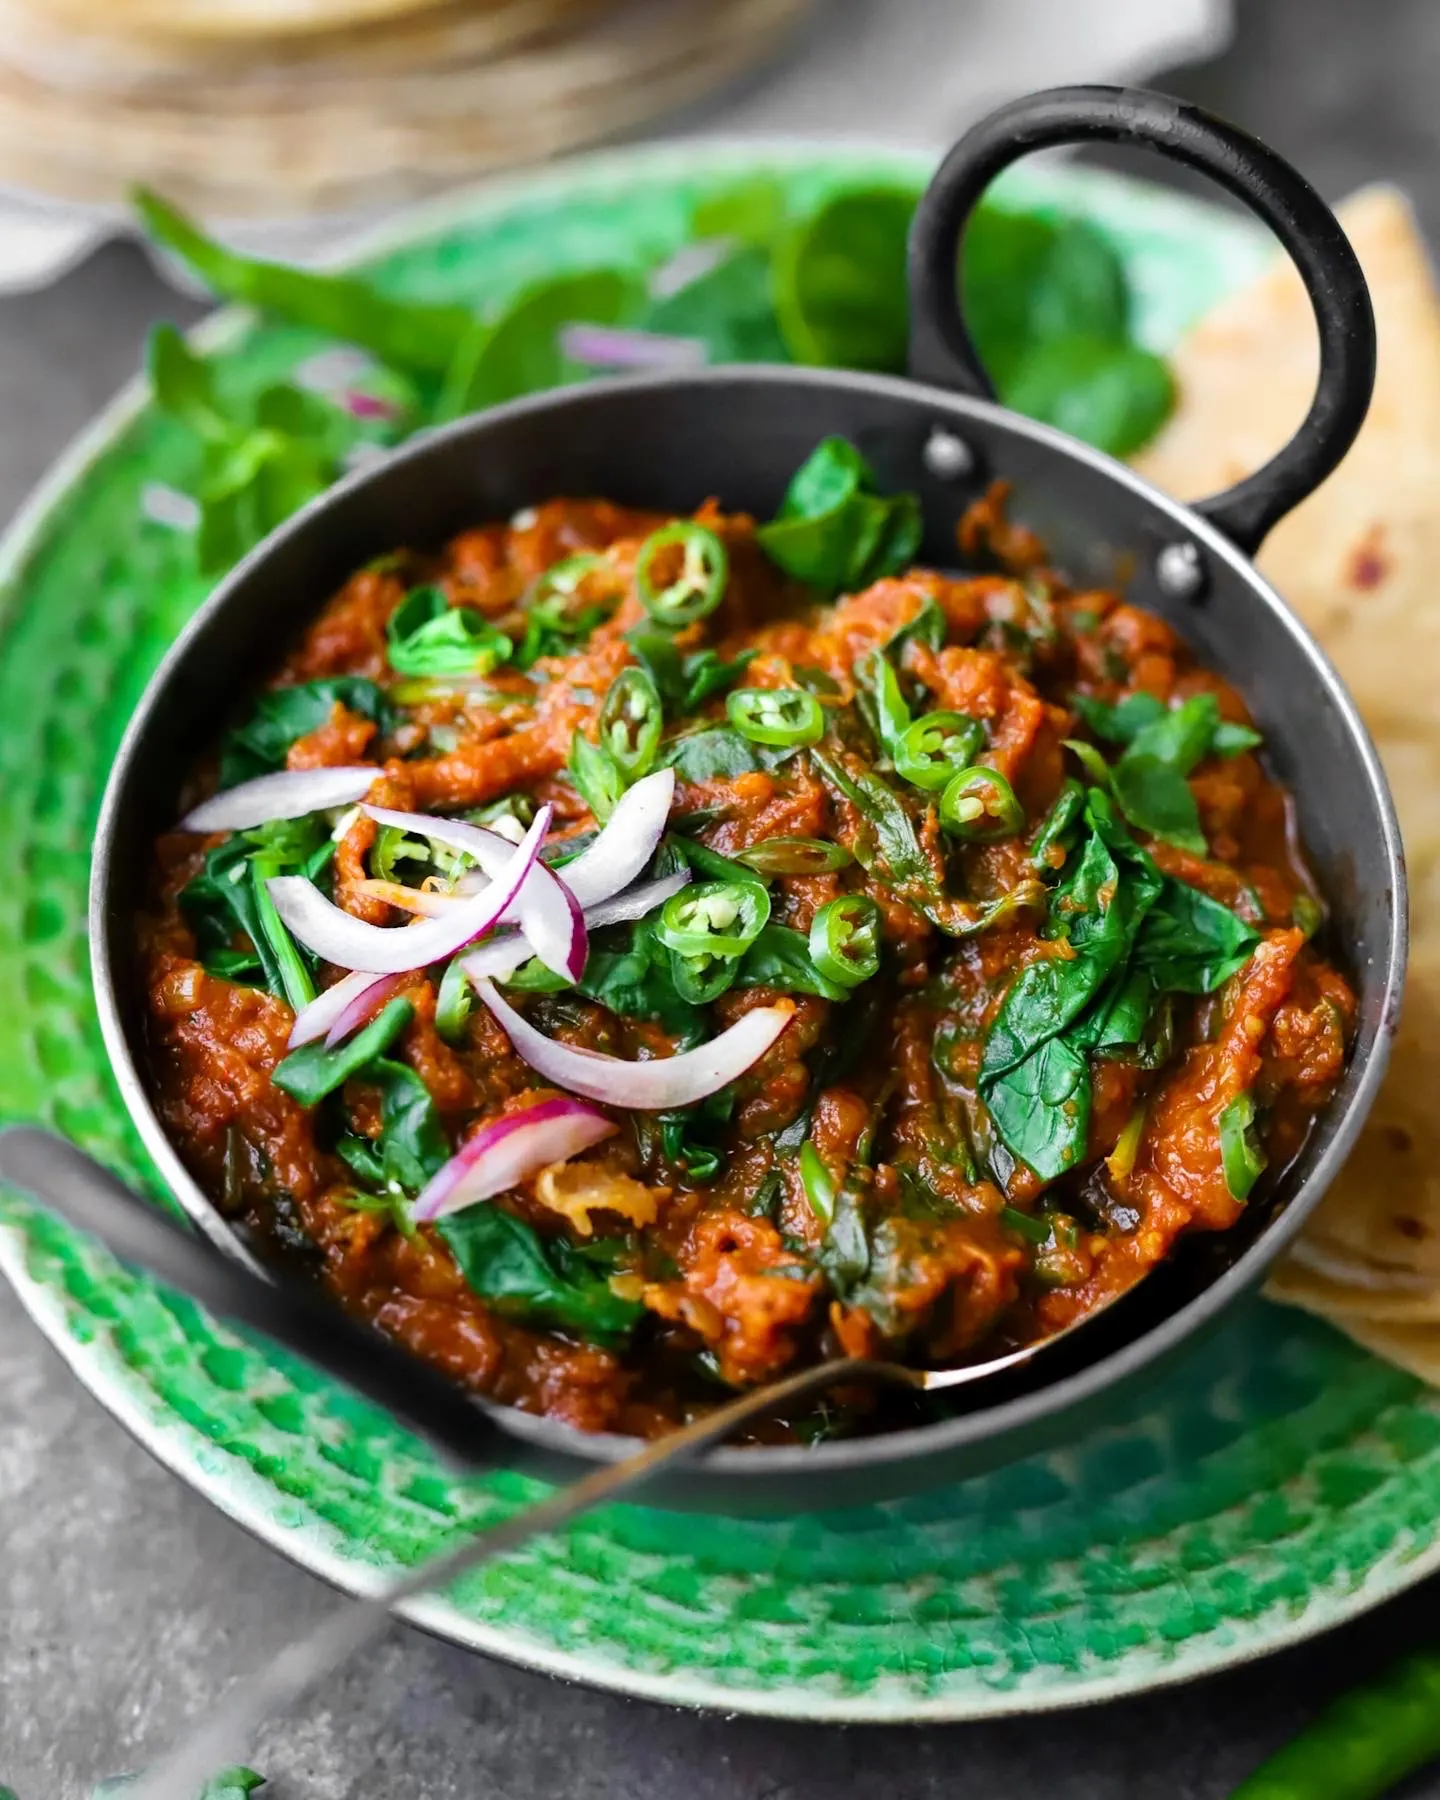 Burnt Aubergine & Spinach Curry 10 Easy Veg Curries for Roti